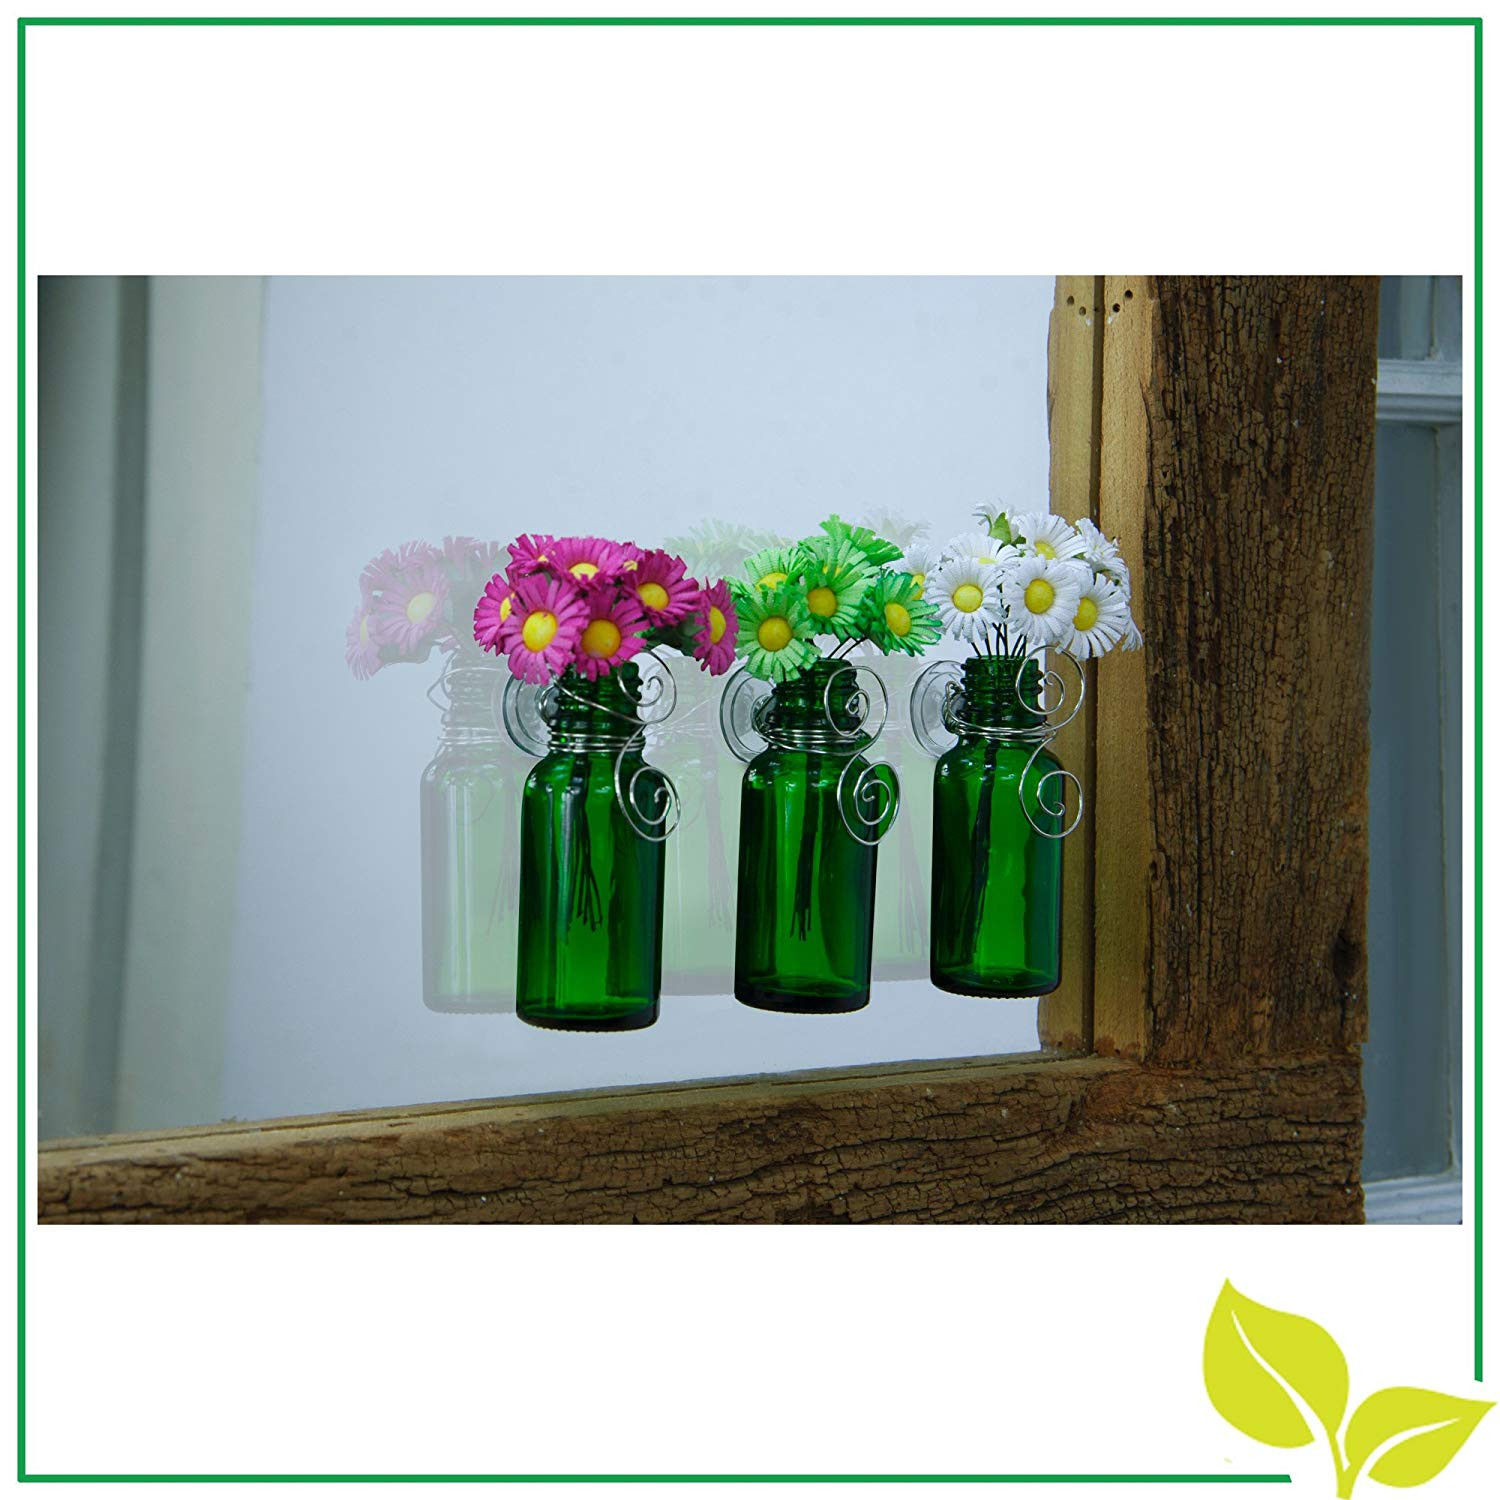 15 Lovable Suction Cup Window Vase 2024 free download suction cup window vase of amazon com vazzini mini vase bouquet suction cup bud bottle inside amazon com vazzini mini vase bouquet suction cup bud bottle holder with flowers decorative for w